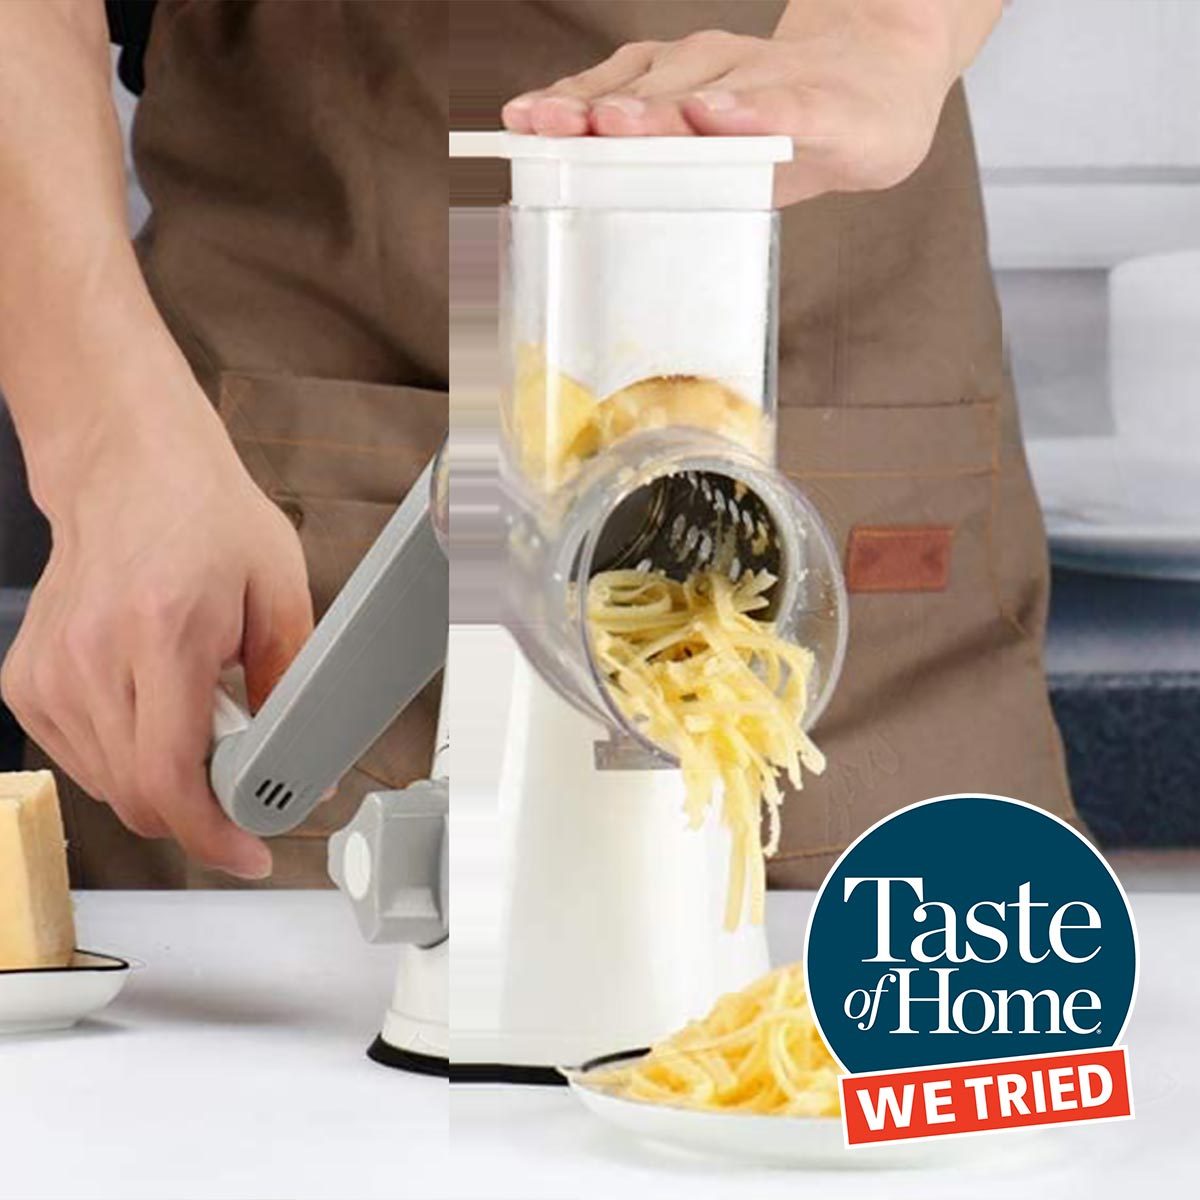 https://www.tasteofhome.com/wp-content/uploads/2022/05/Rotary-Cheese-Grater_ecomm_via-amazon.com_-1.jpg?fit=700%2C700